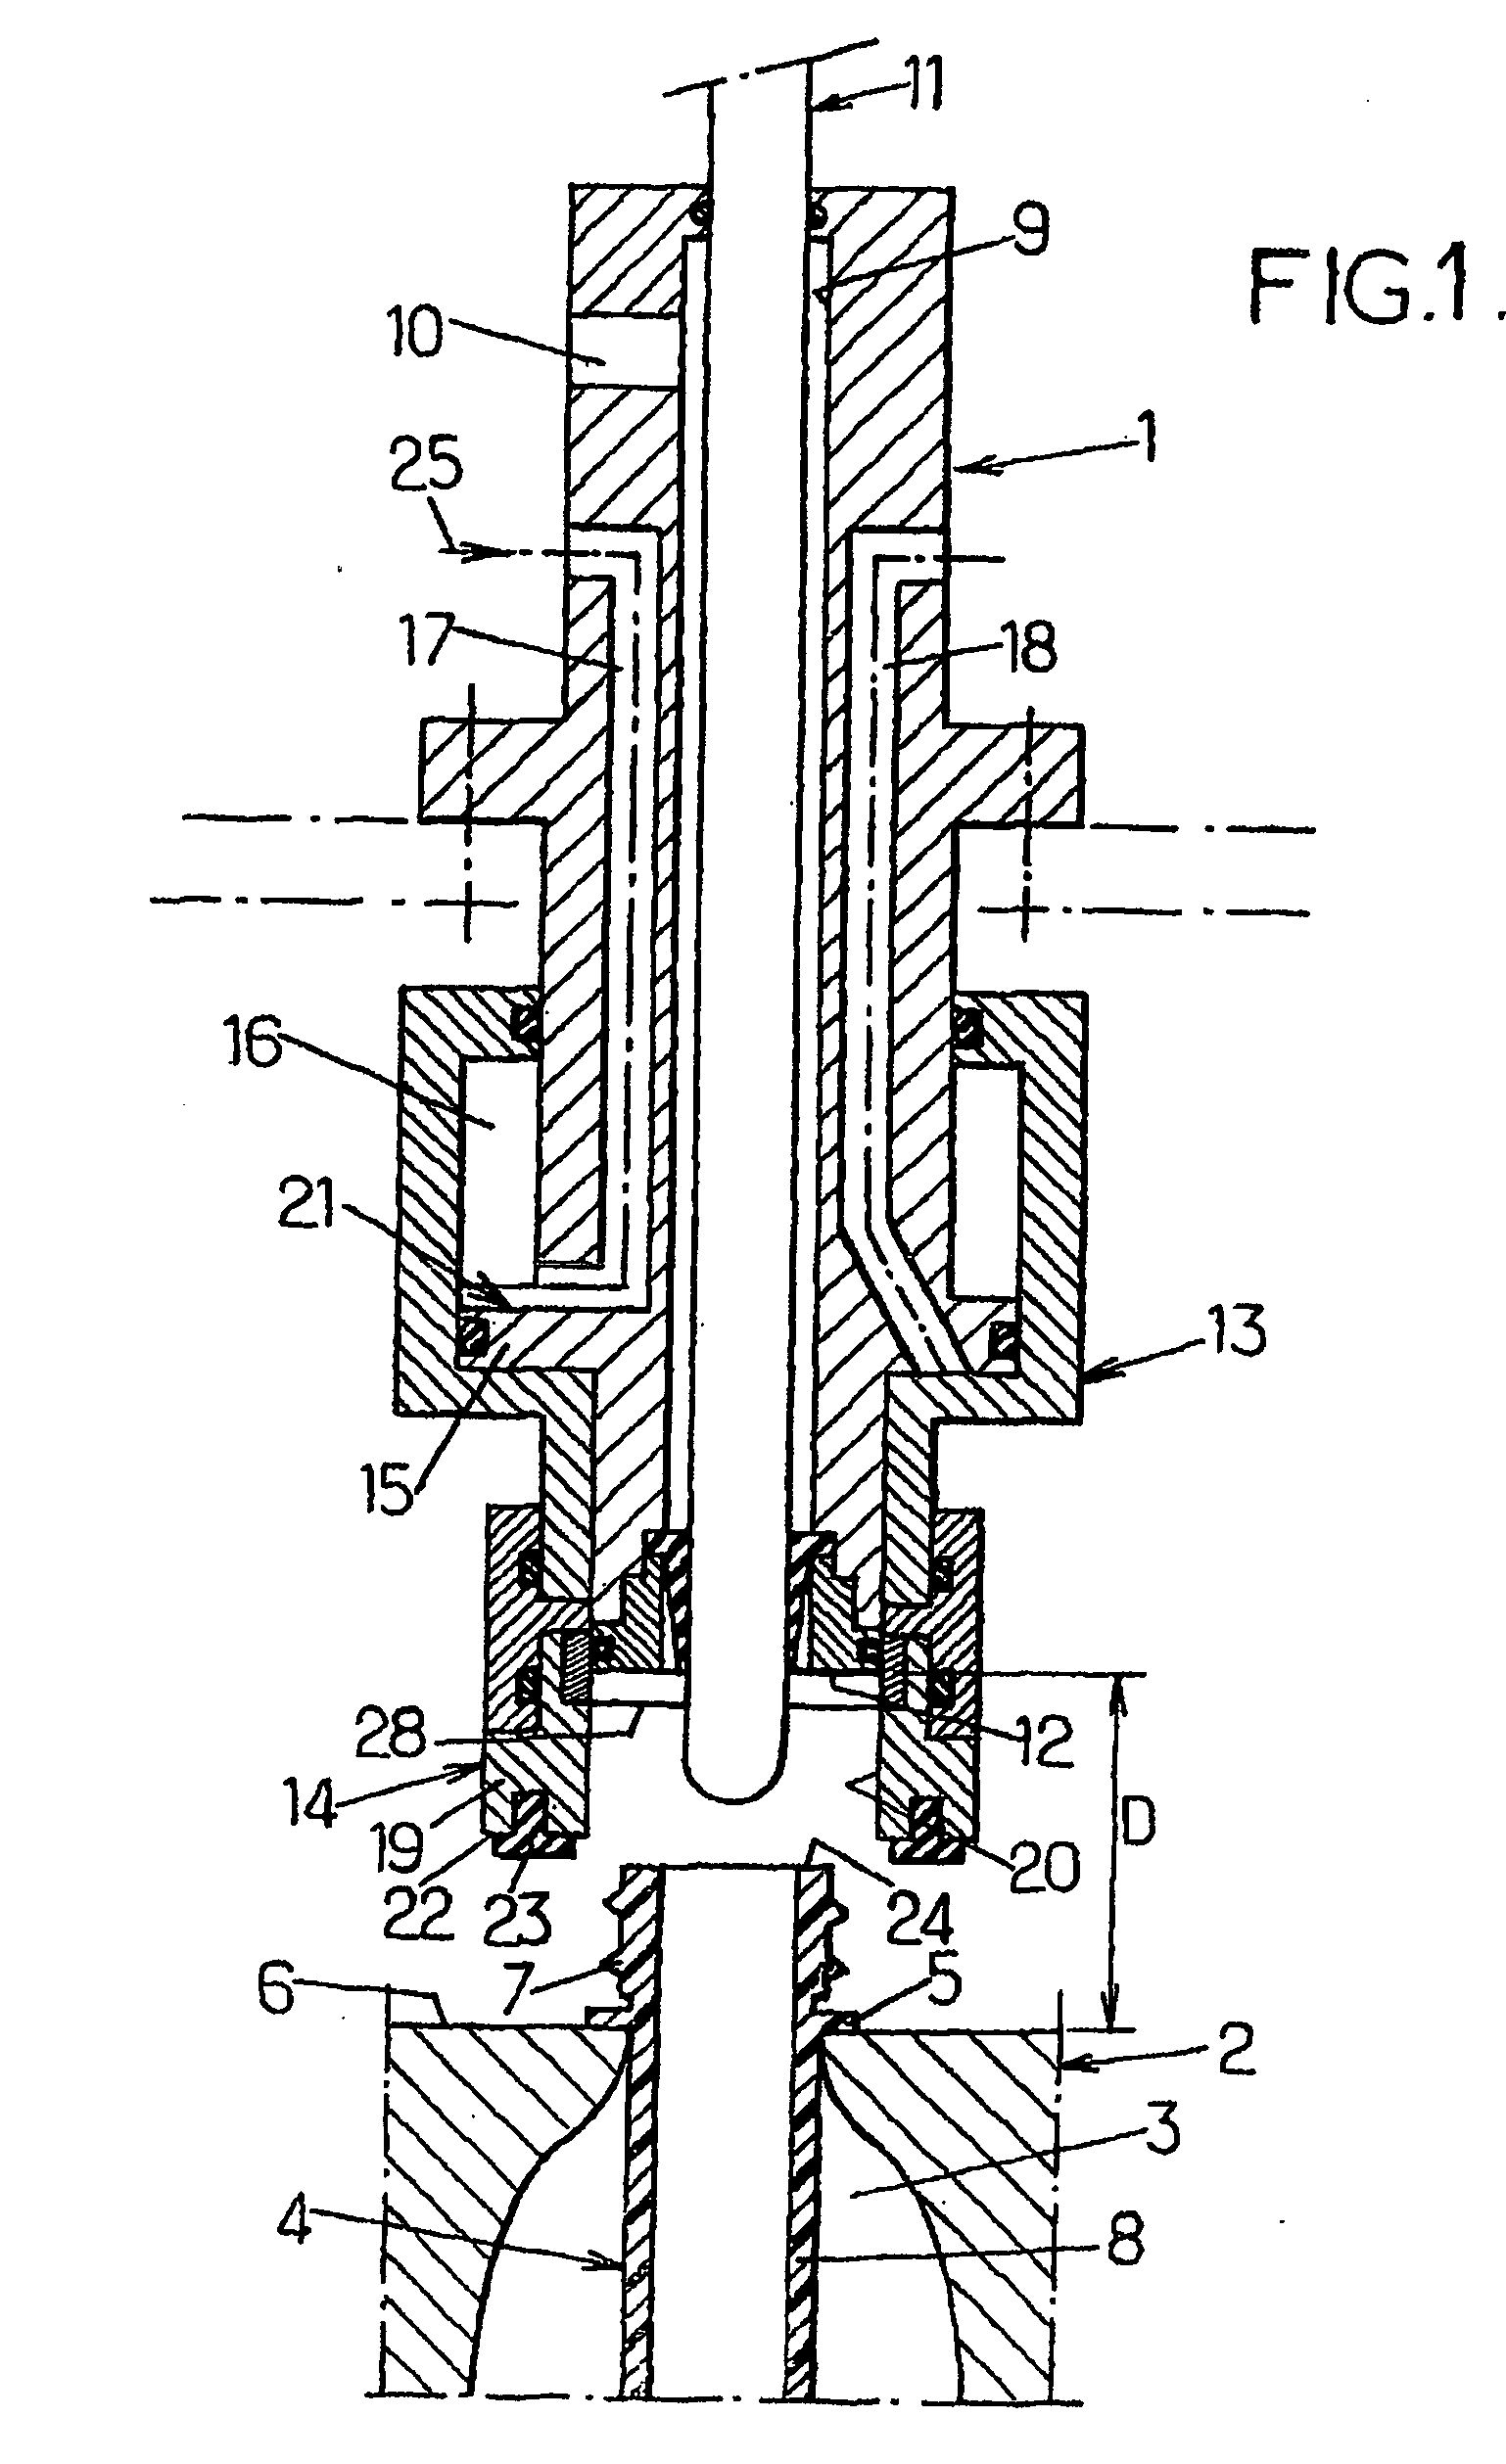 Blow Molding System for the Manufacture of Thermoplastic Receptacles